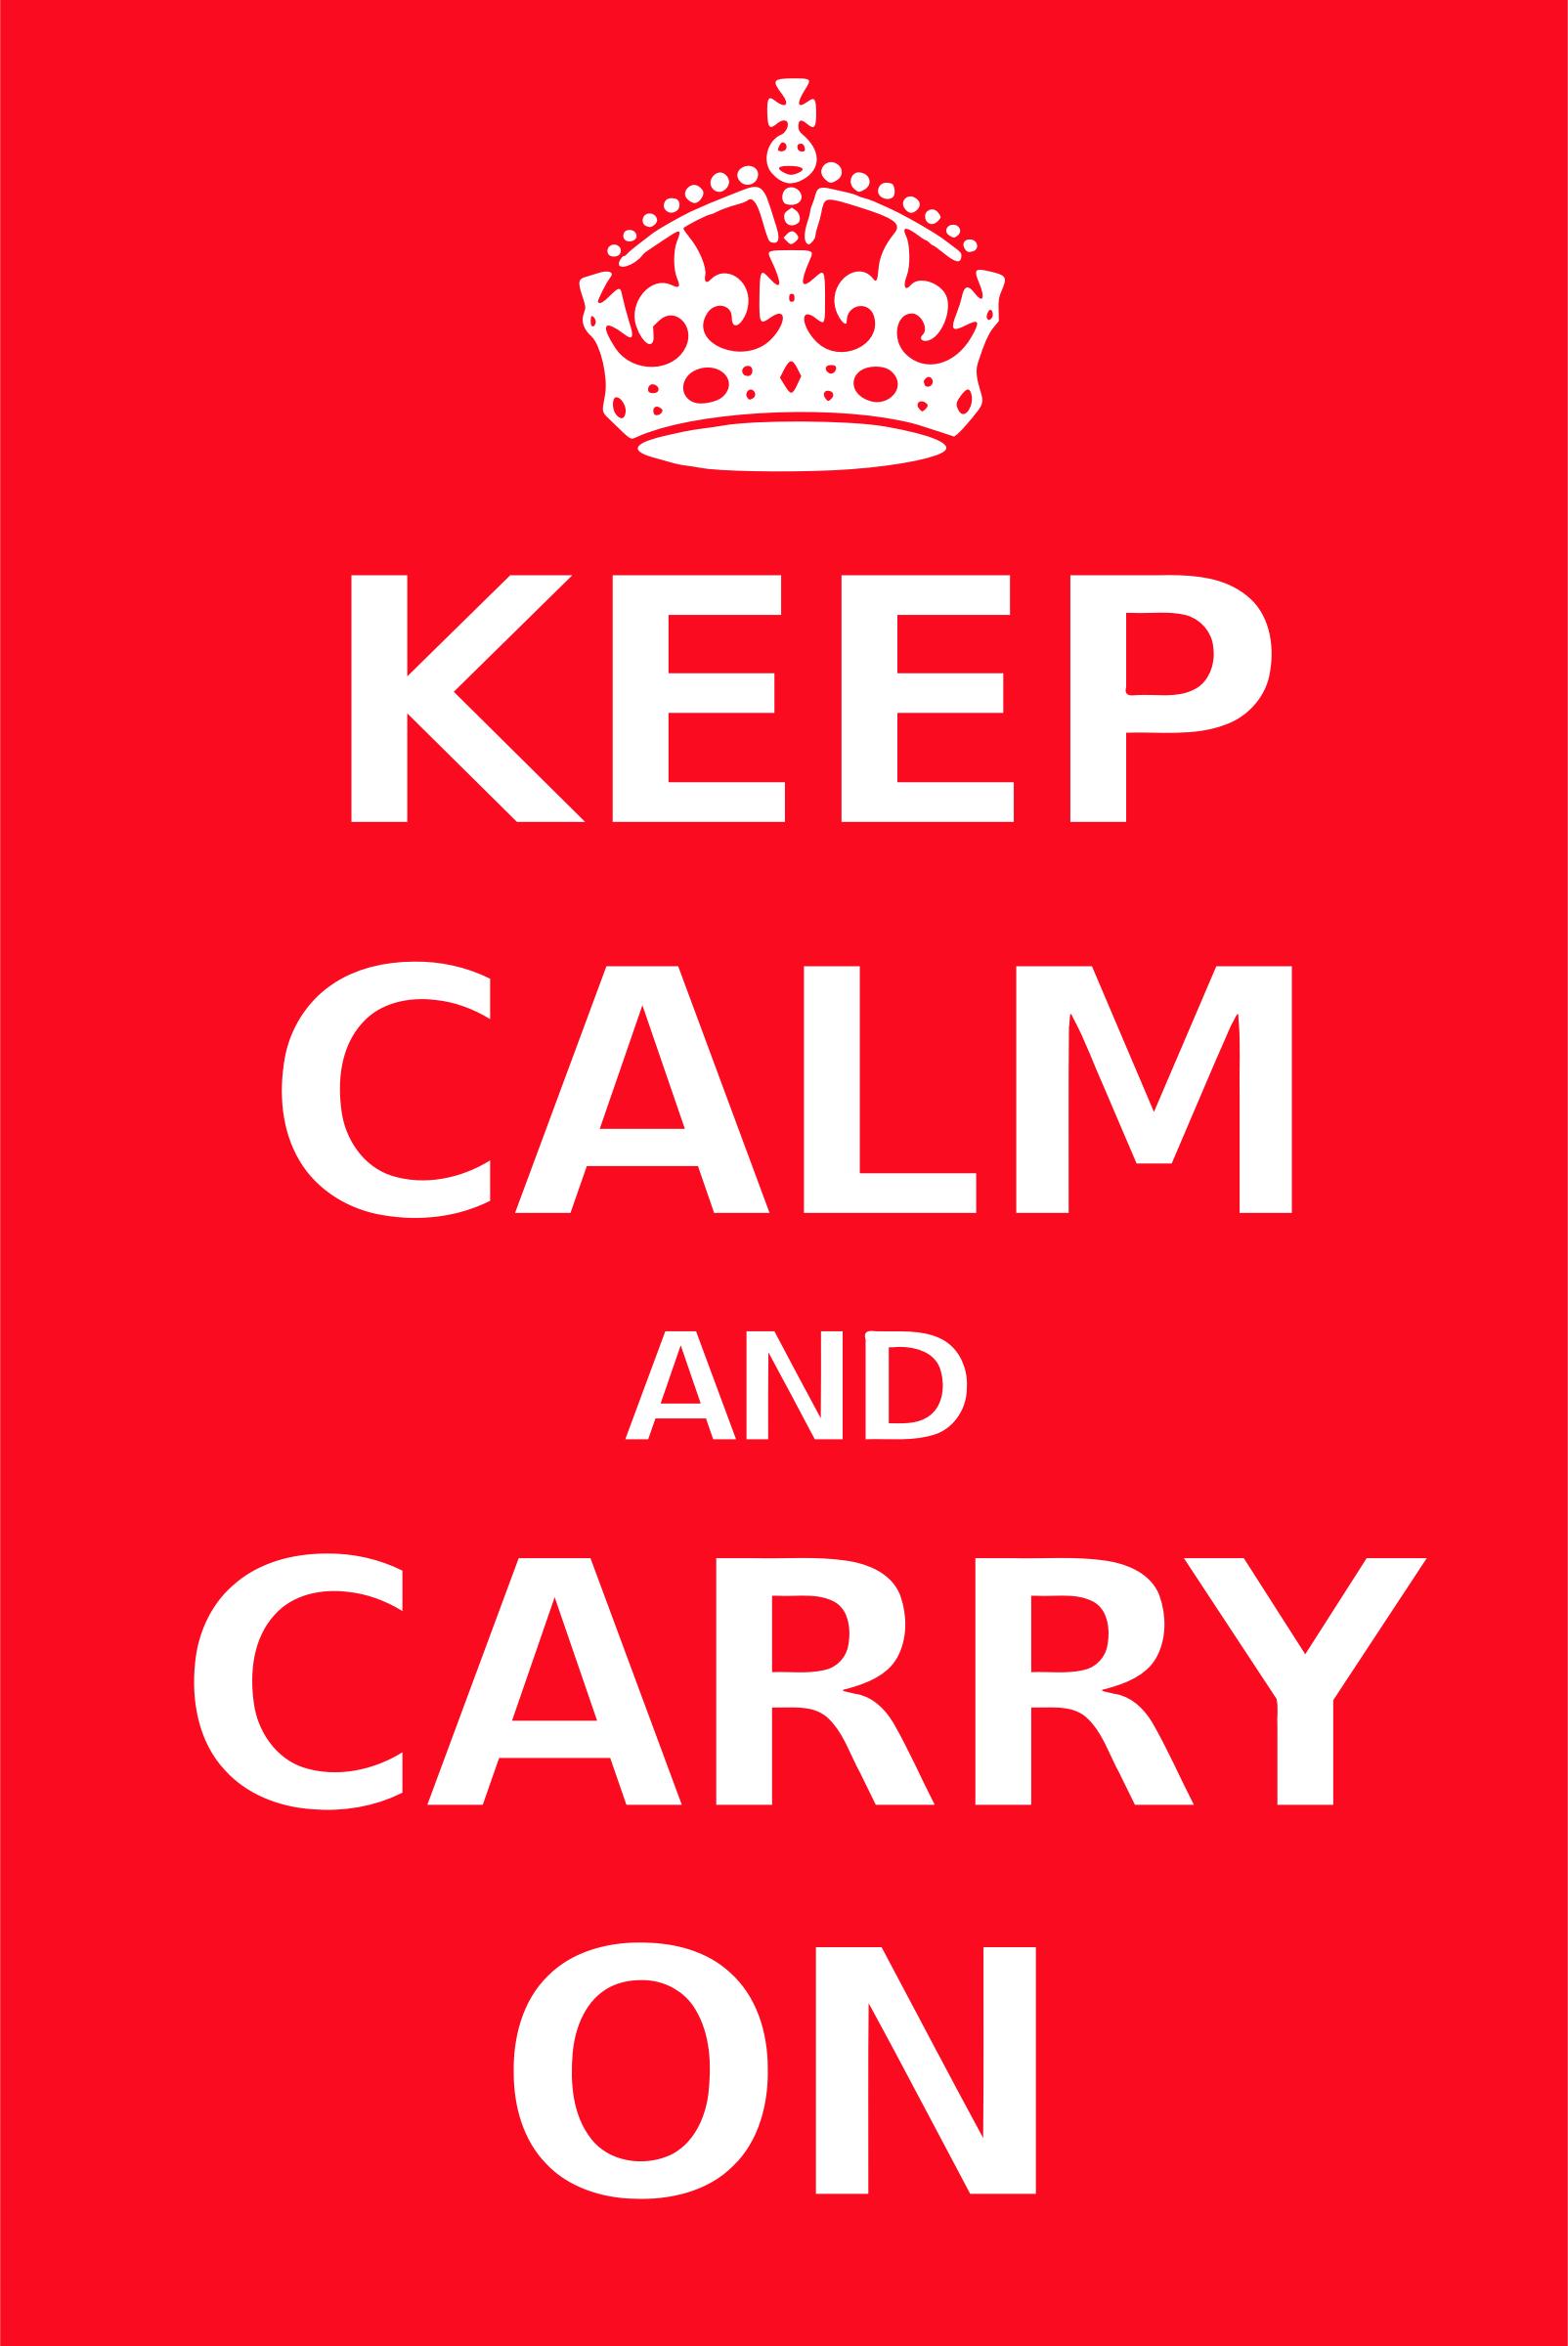 Keep calm poster png